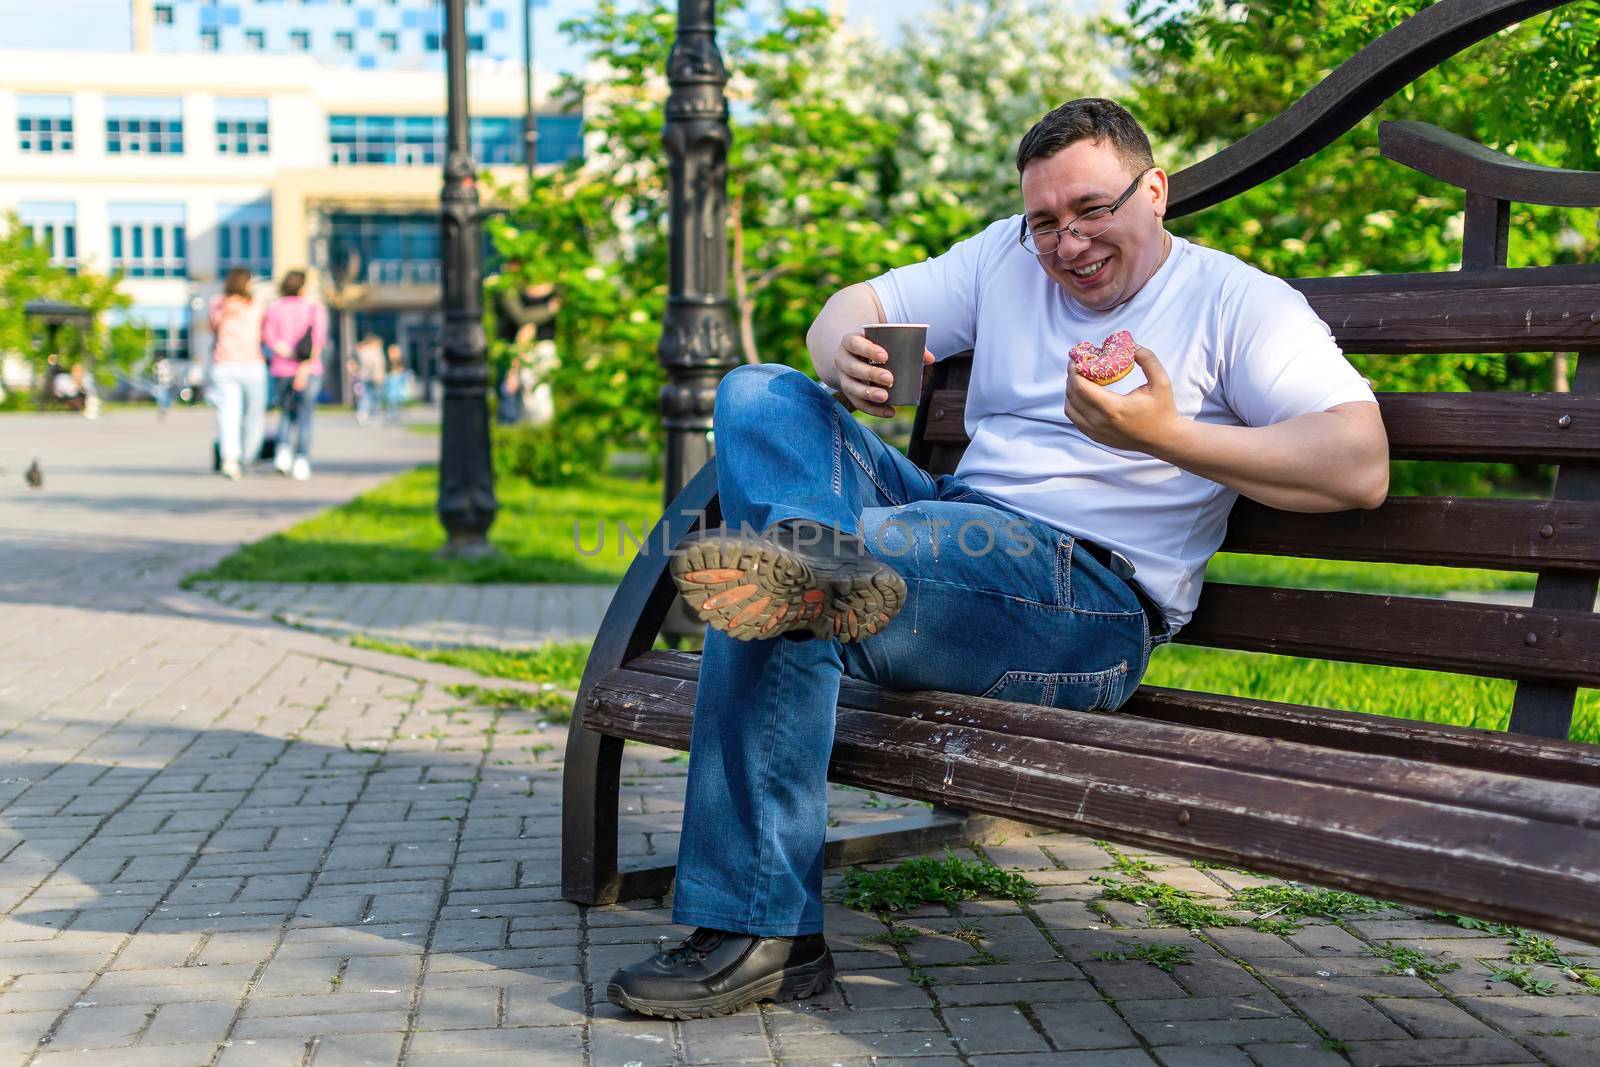 A cheerful young man, sitting on a bench with a donut, spilled coffee on his jeans